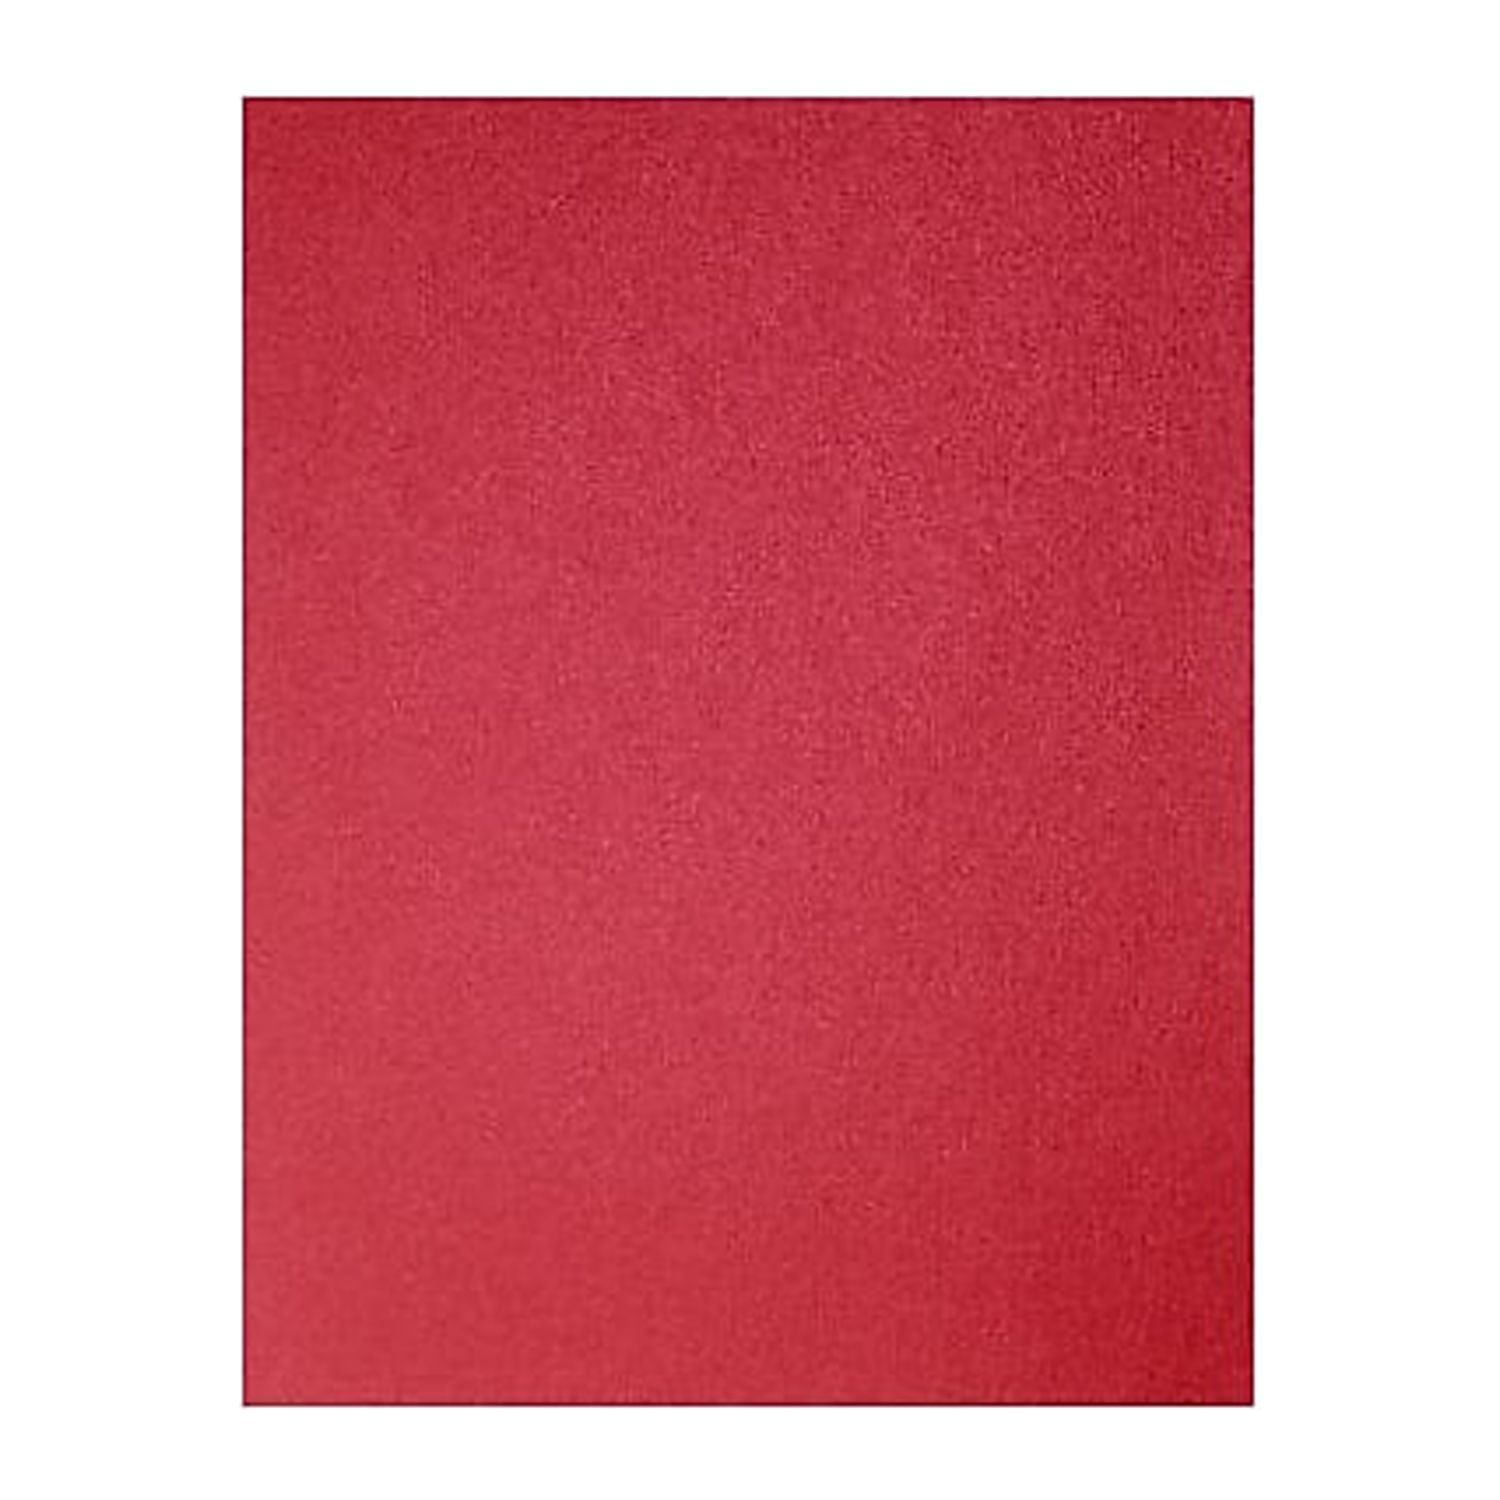 Red Wax Paper Single Color Ream, 24 x 36